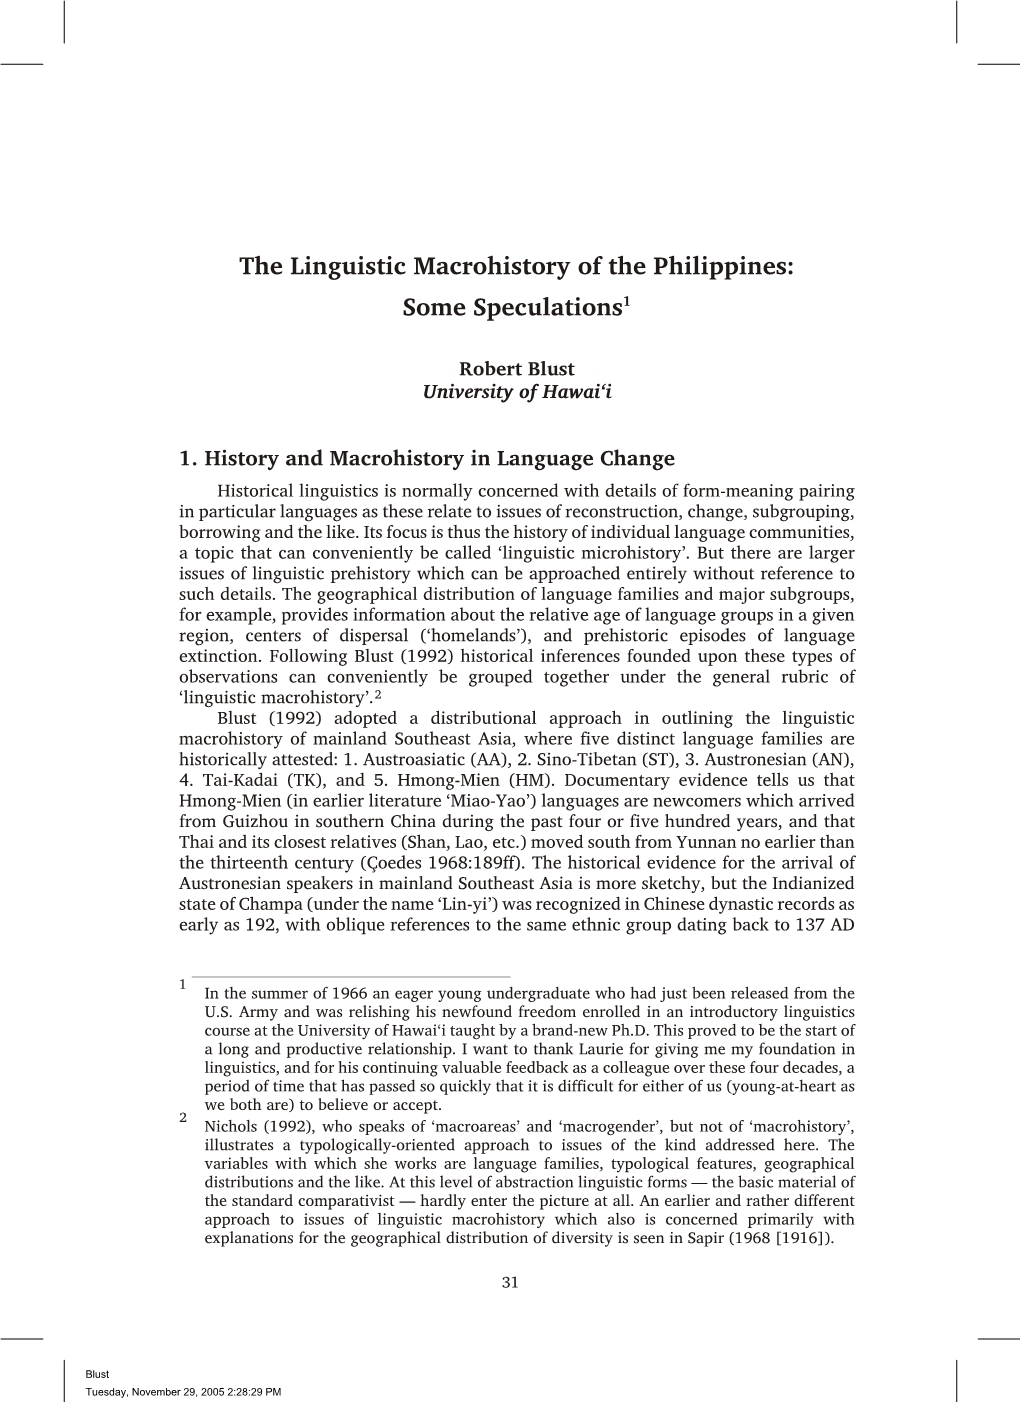 The Linguistic Macrohistory of the Philippines: Some Speculations1